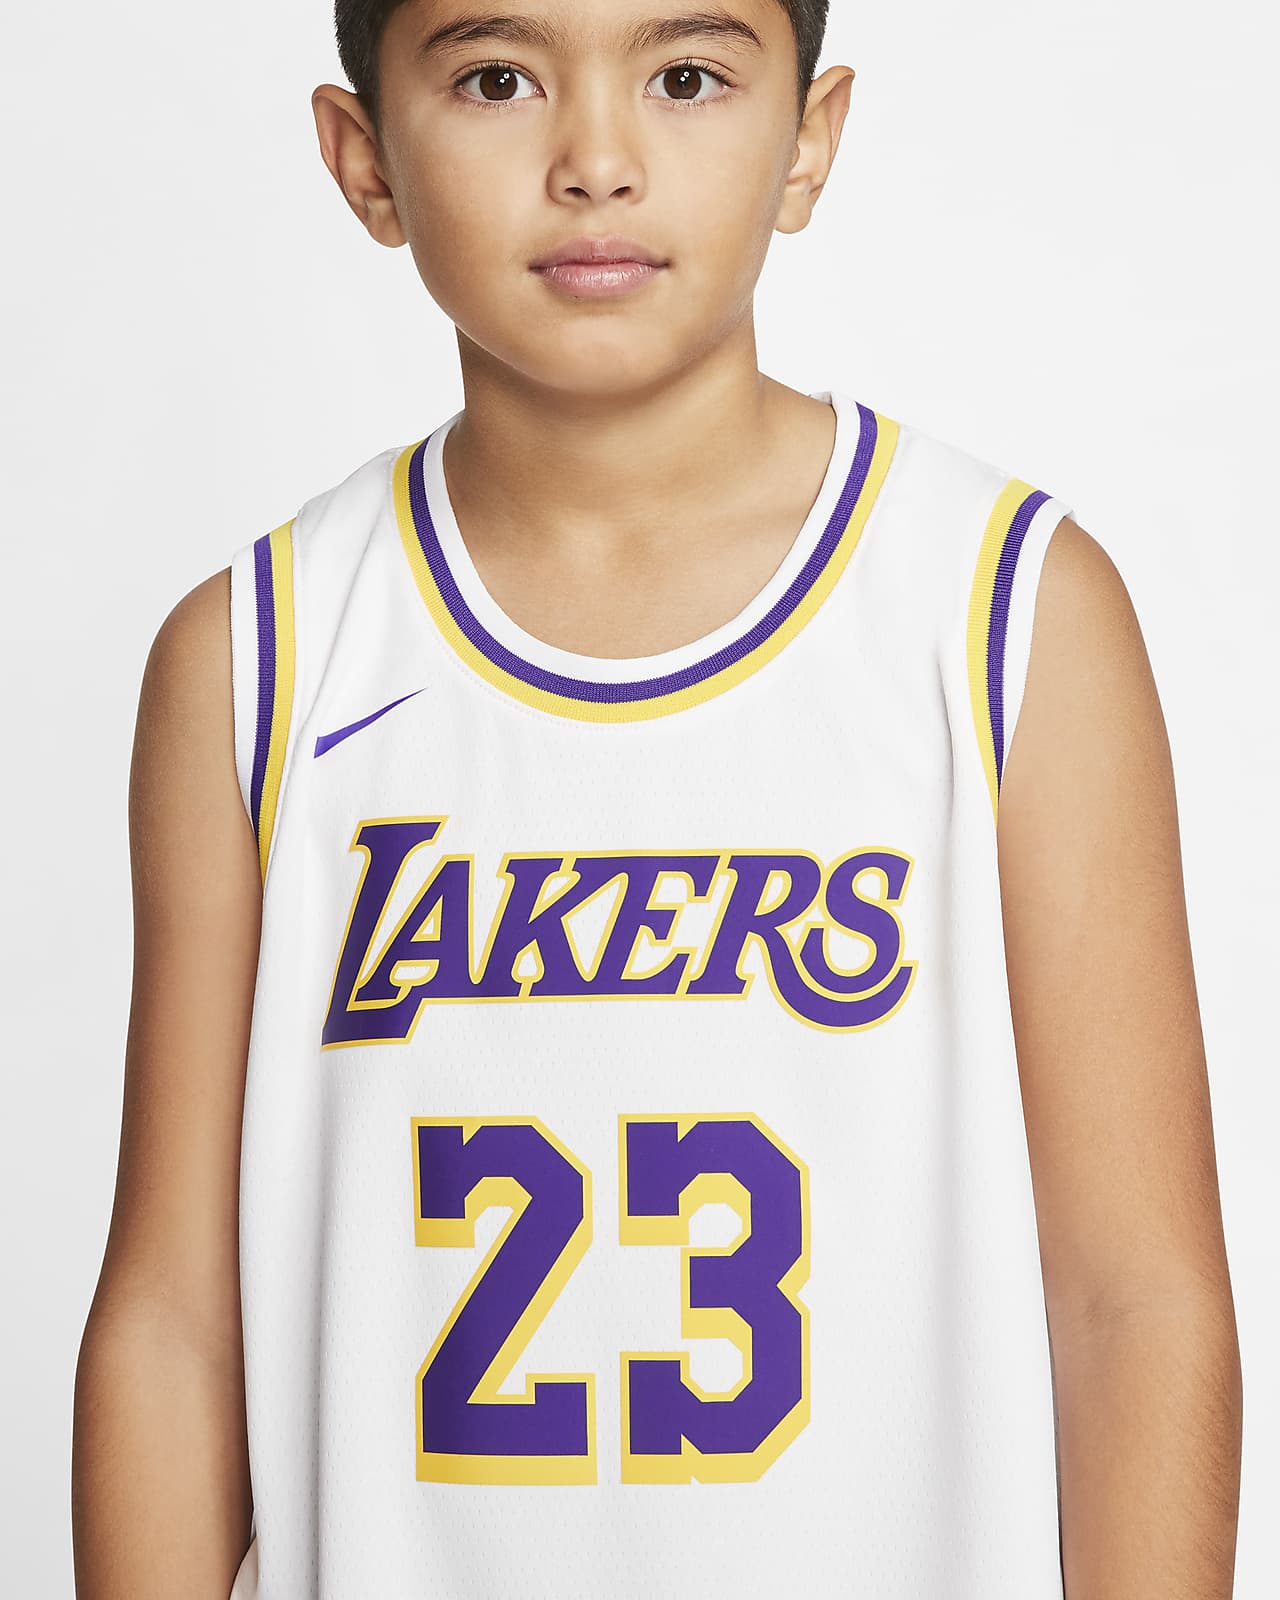 lebron lakers jersey youth cheap online